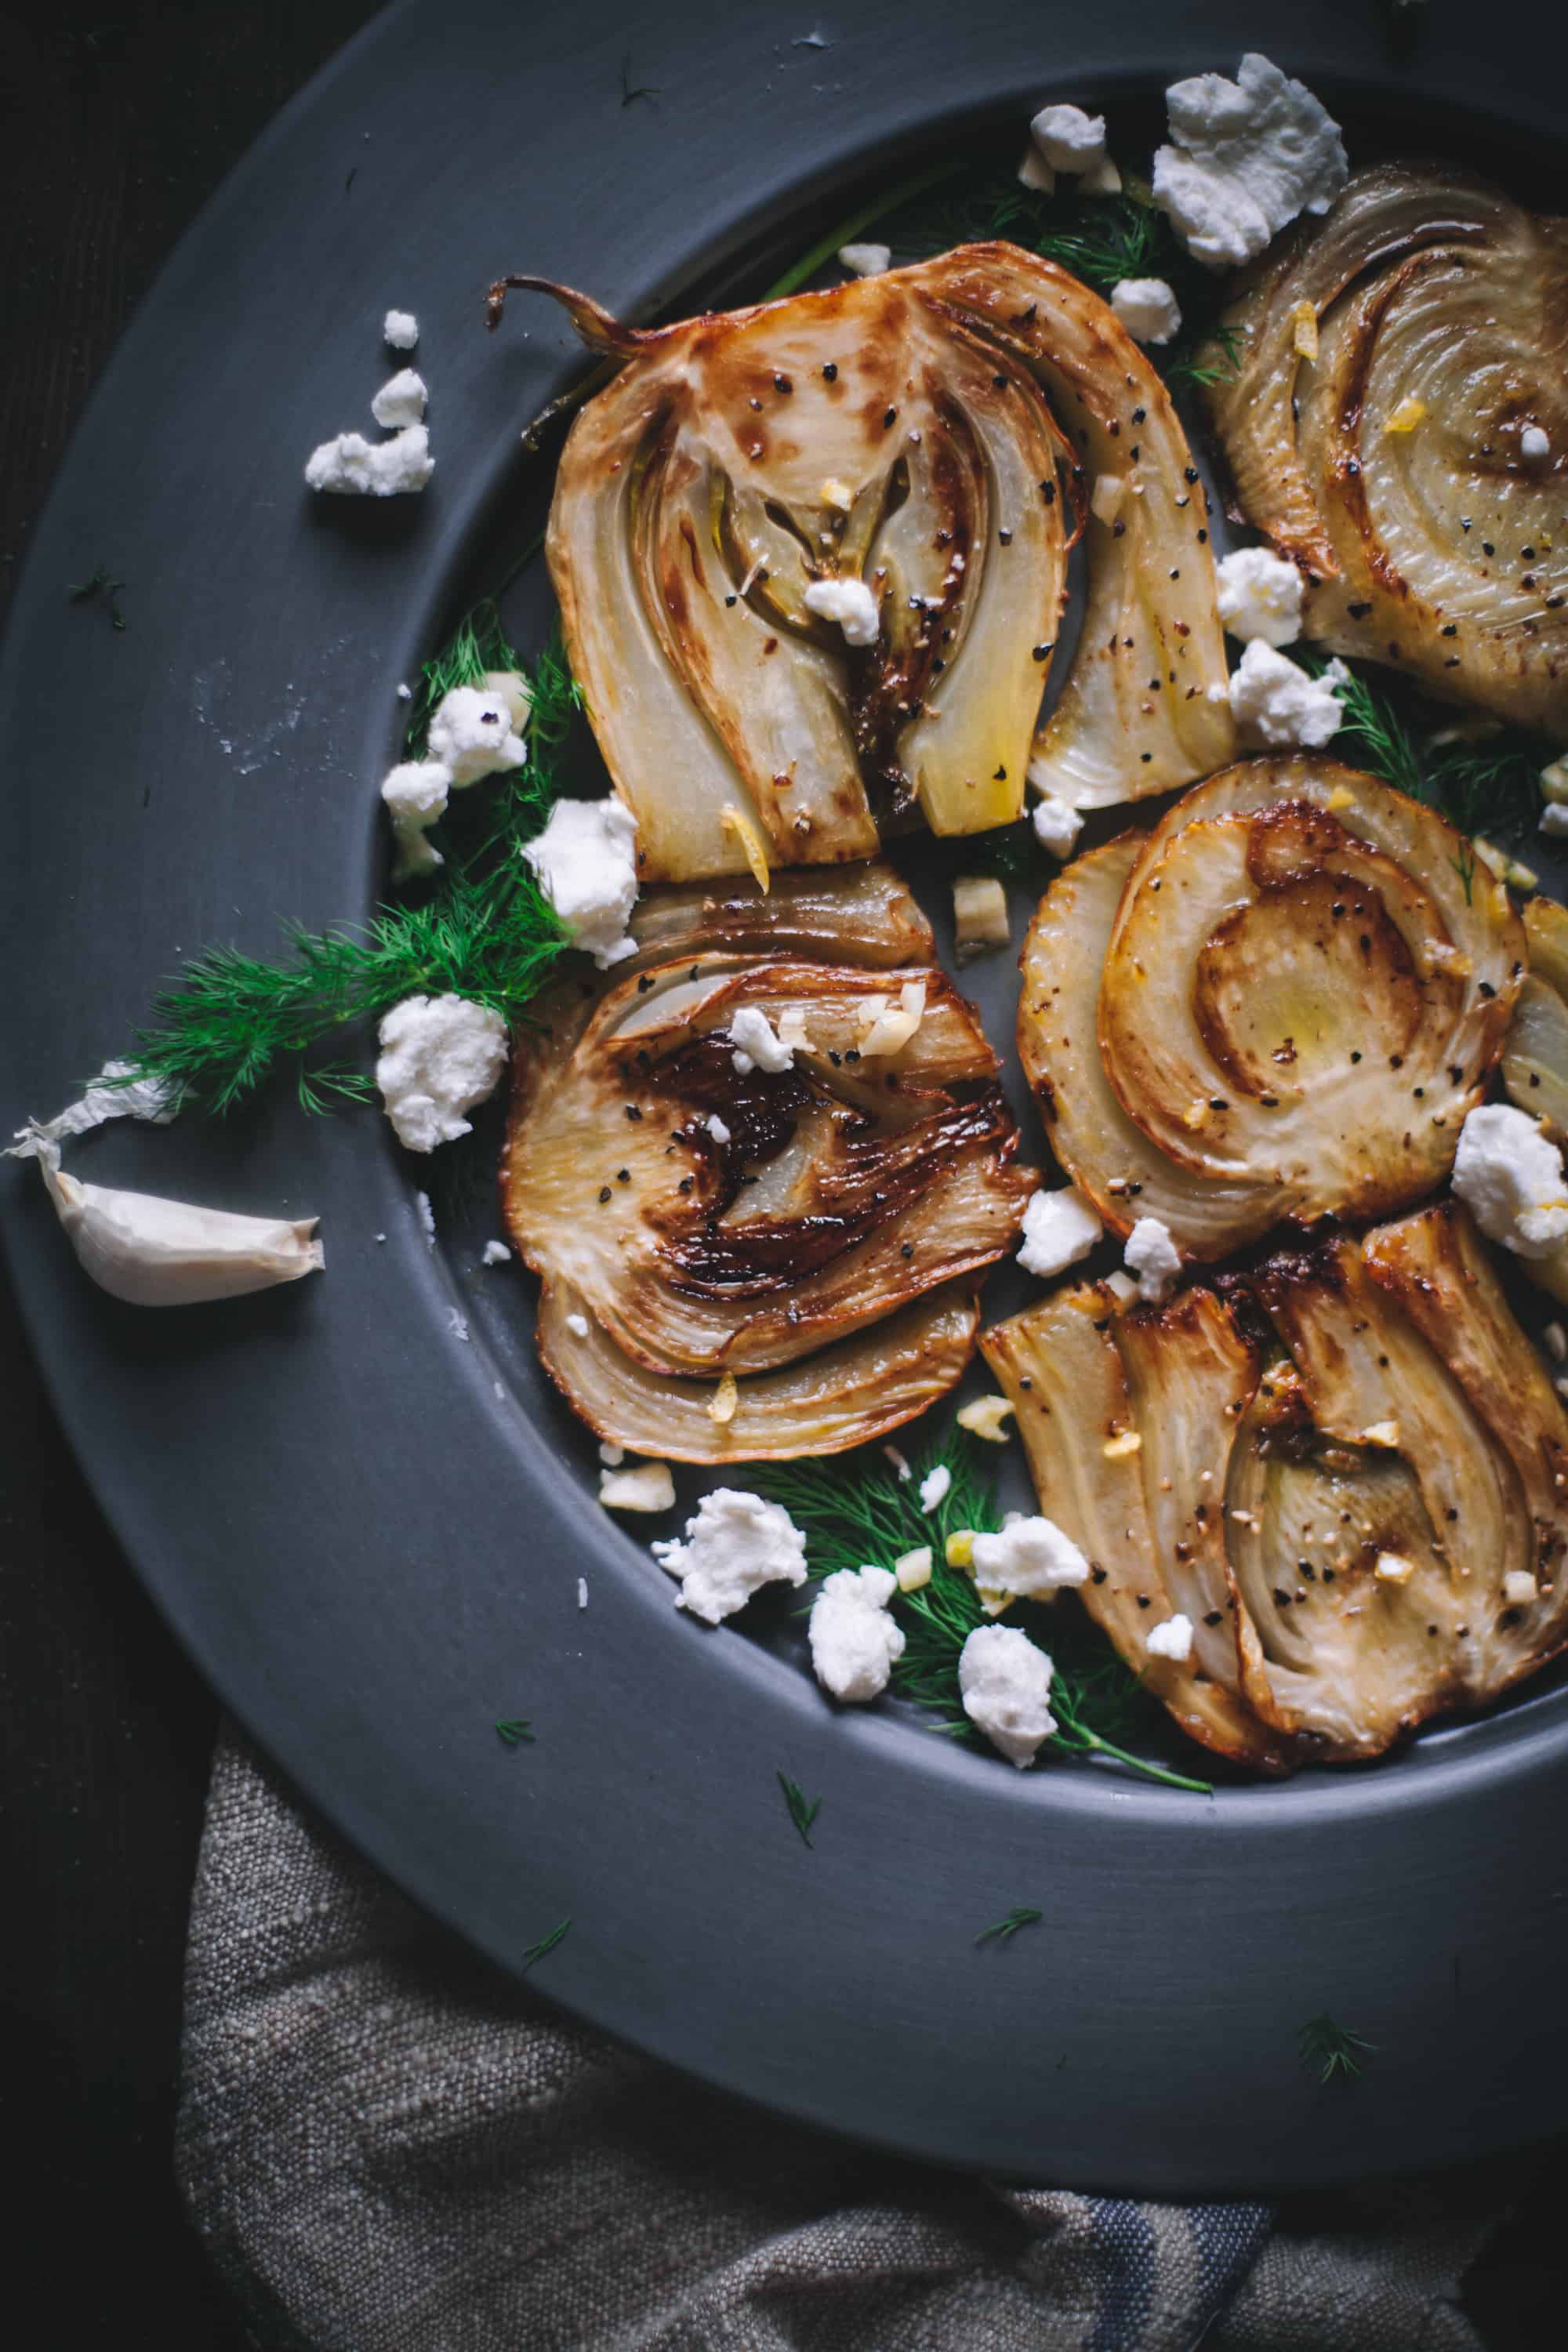 Caramelized Fennel Bulbs With Goat's Cheese by Eva Kosmas Flores